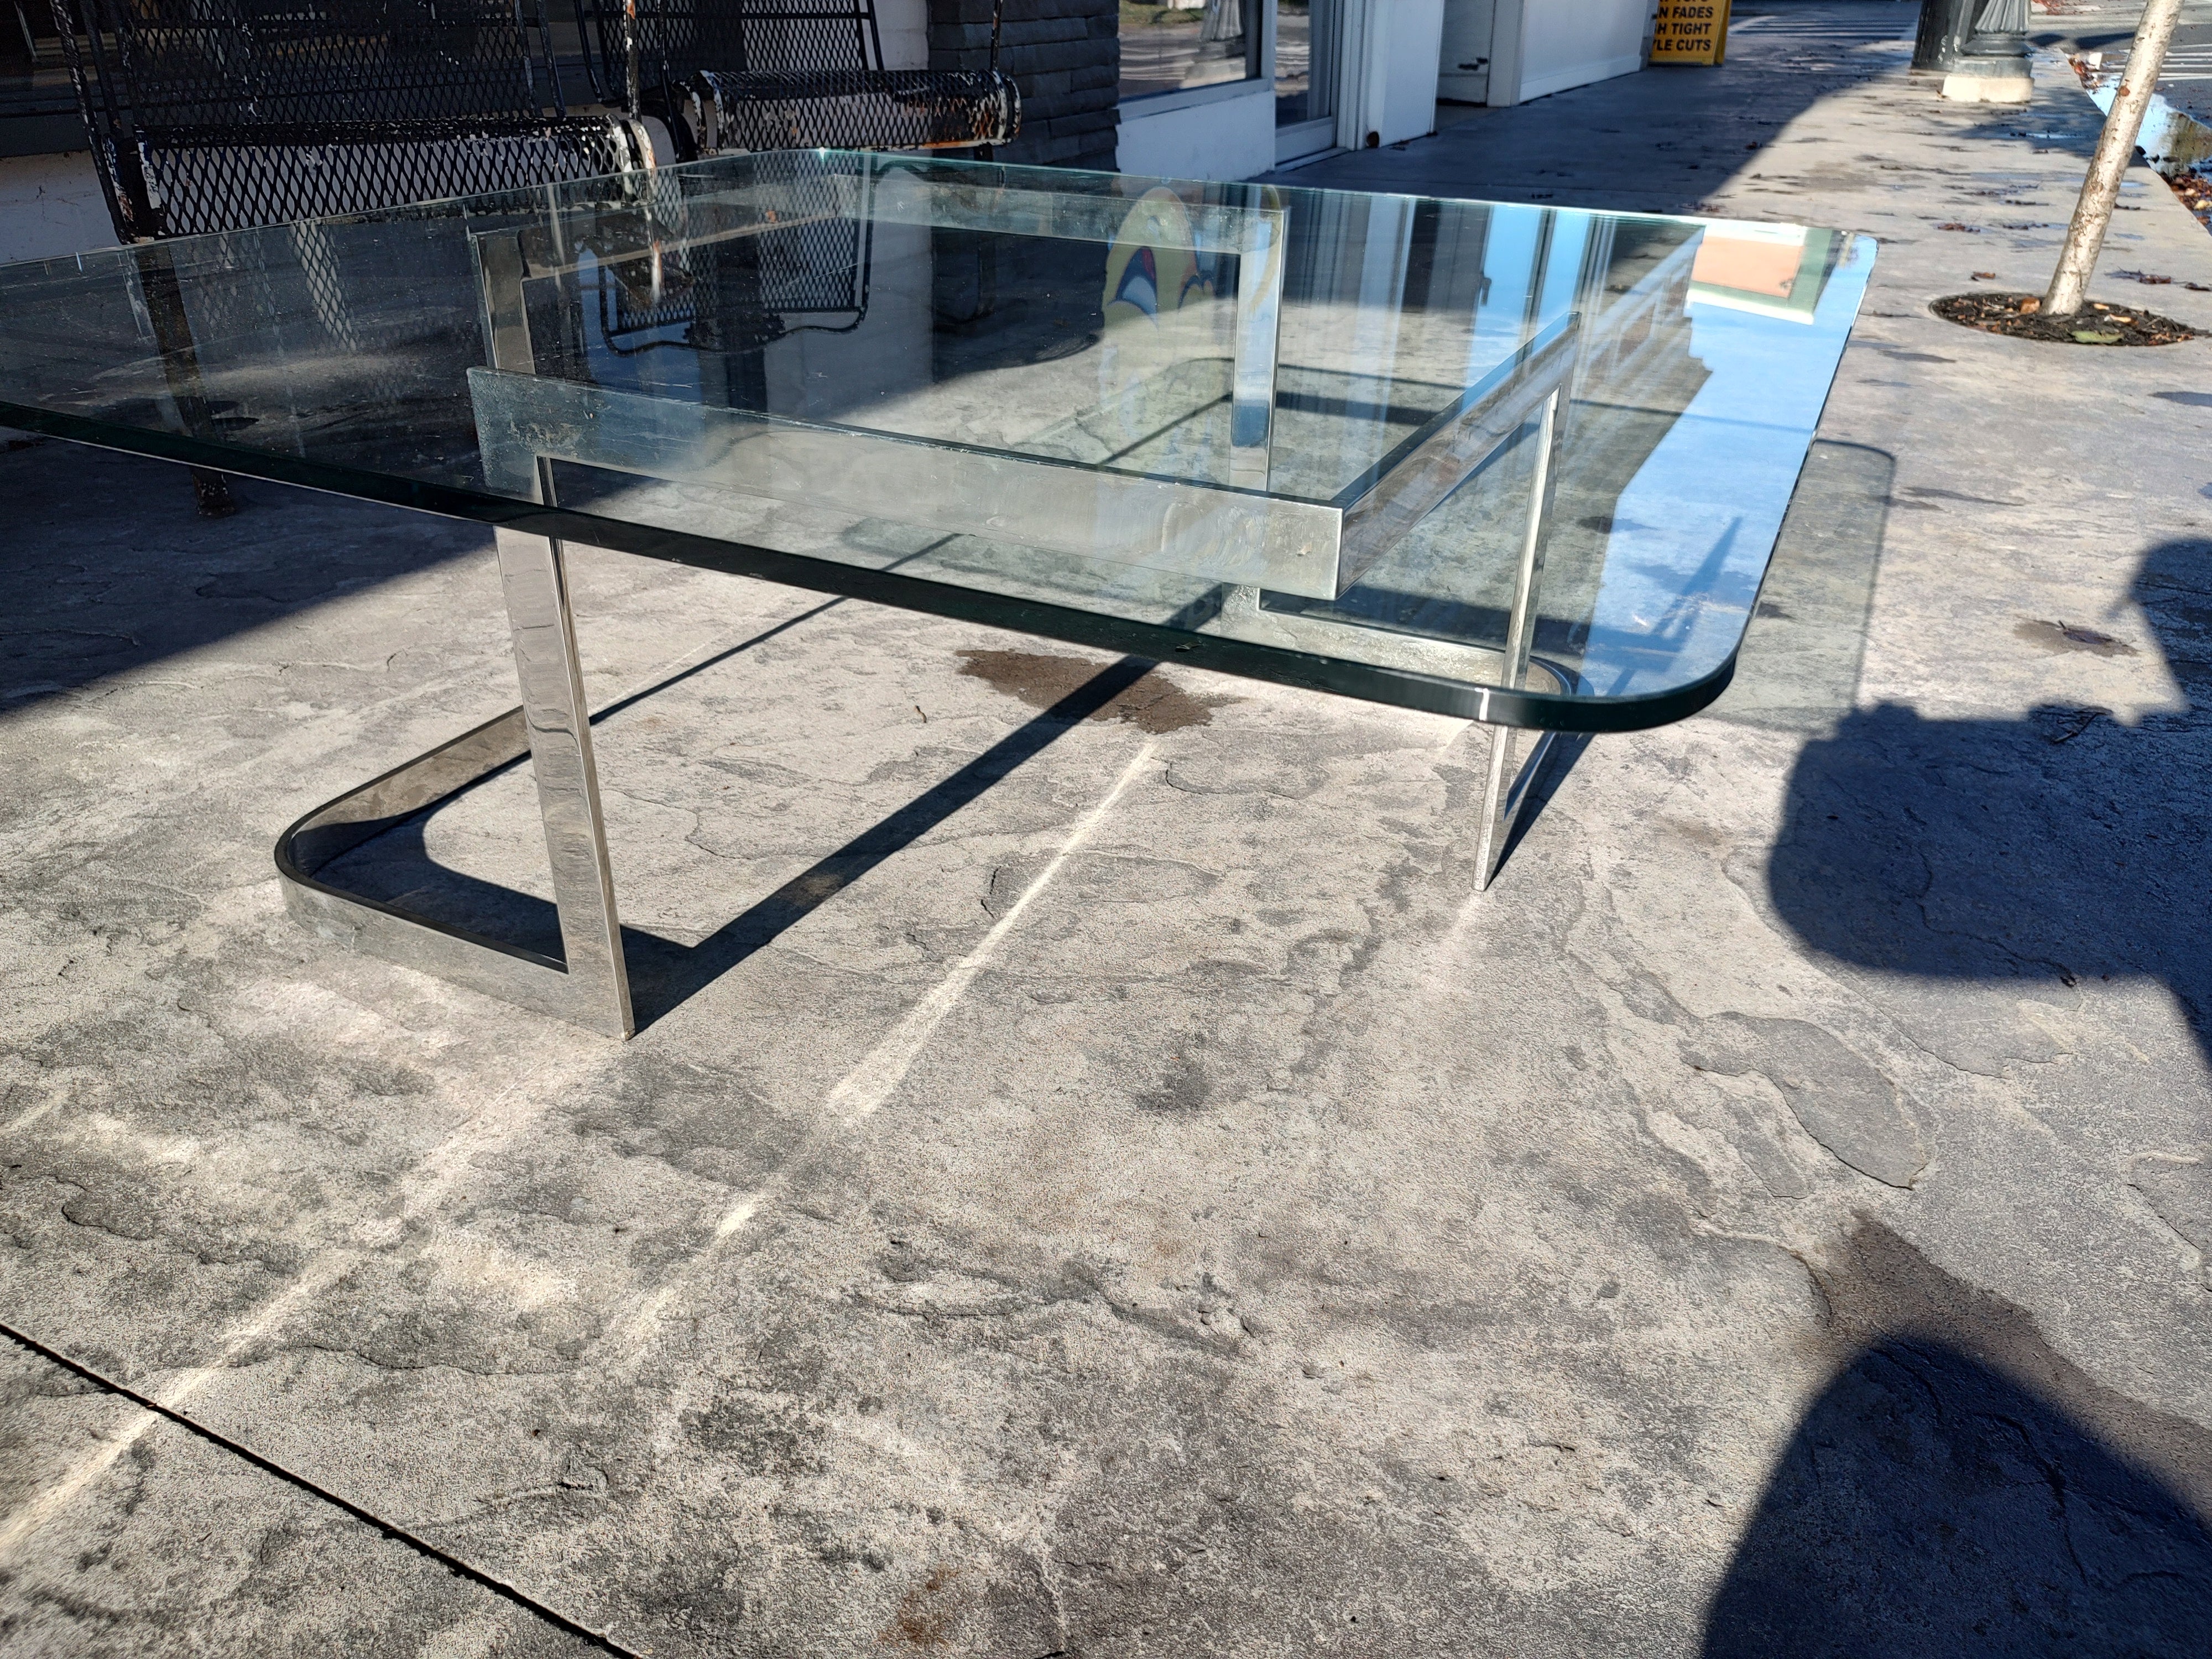 Forged Mid-Century Modern Cocktail Table by Vladimir Kagan # 6703 Glass & Chrome Base For Sale